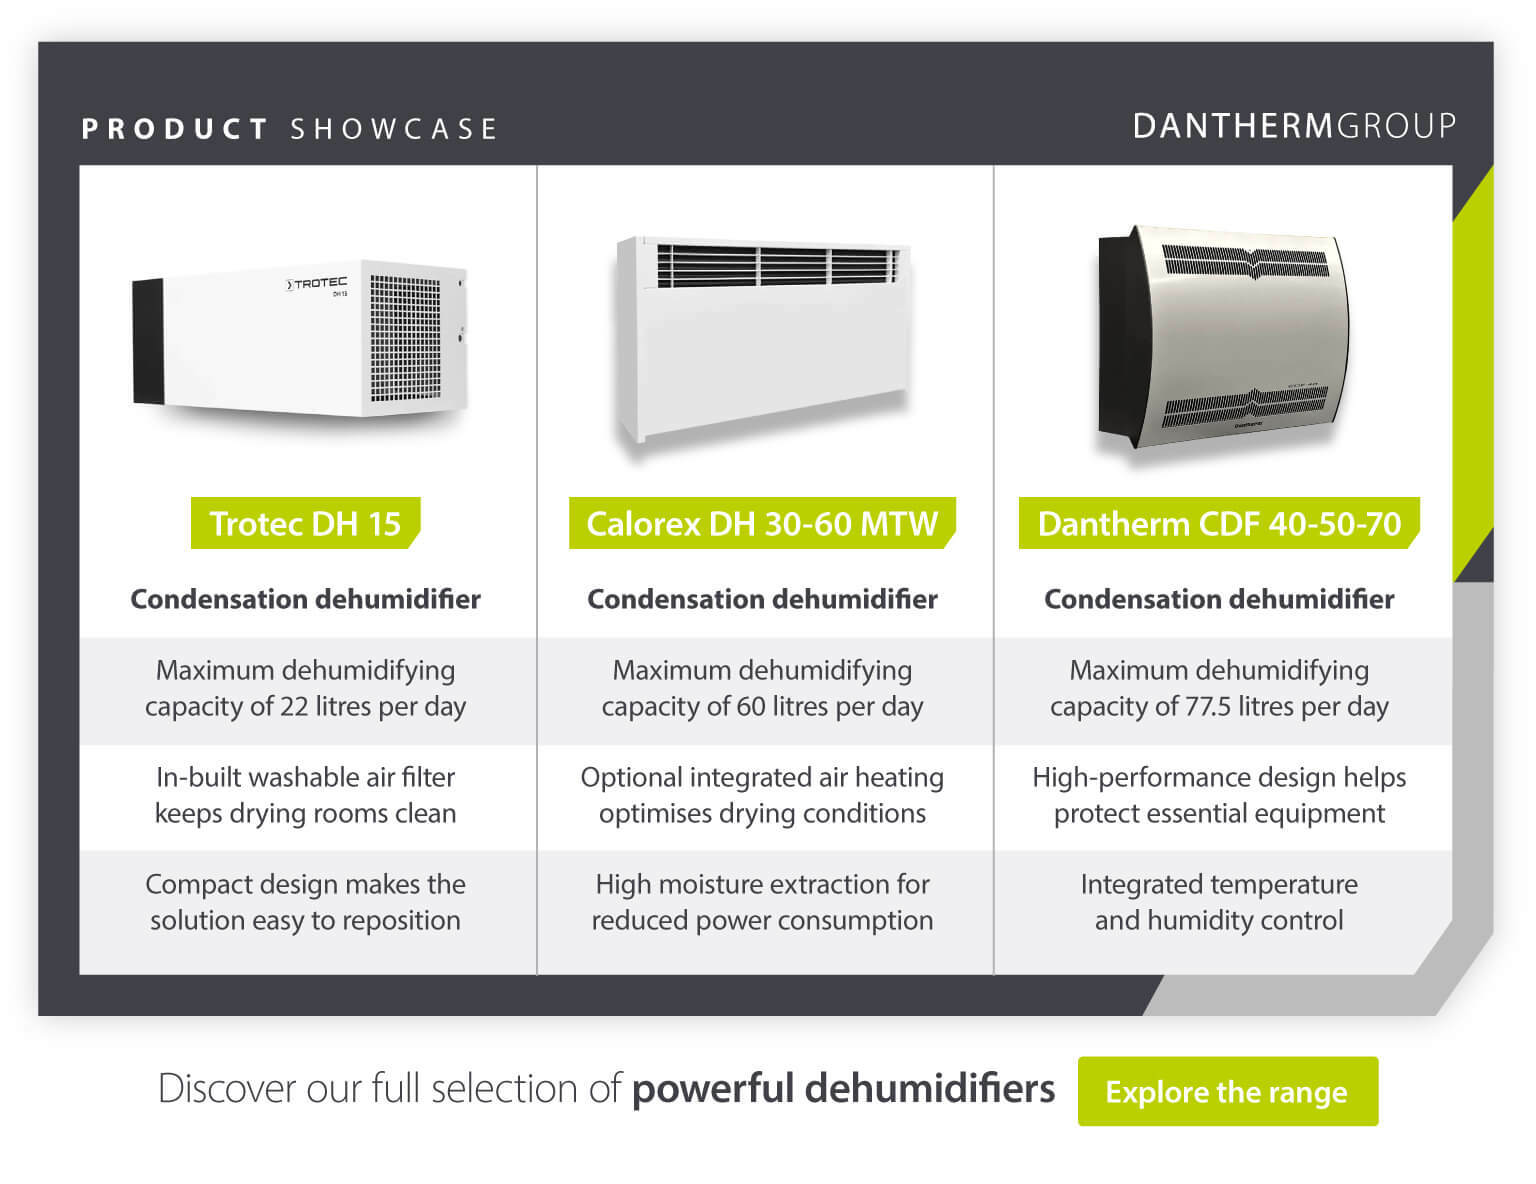 Product showcase comparing condensation dehumidifiers for emergency service drying rooms